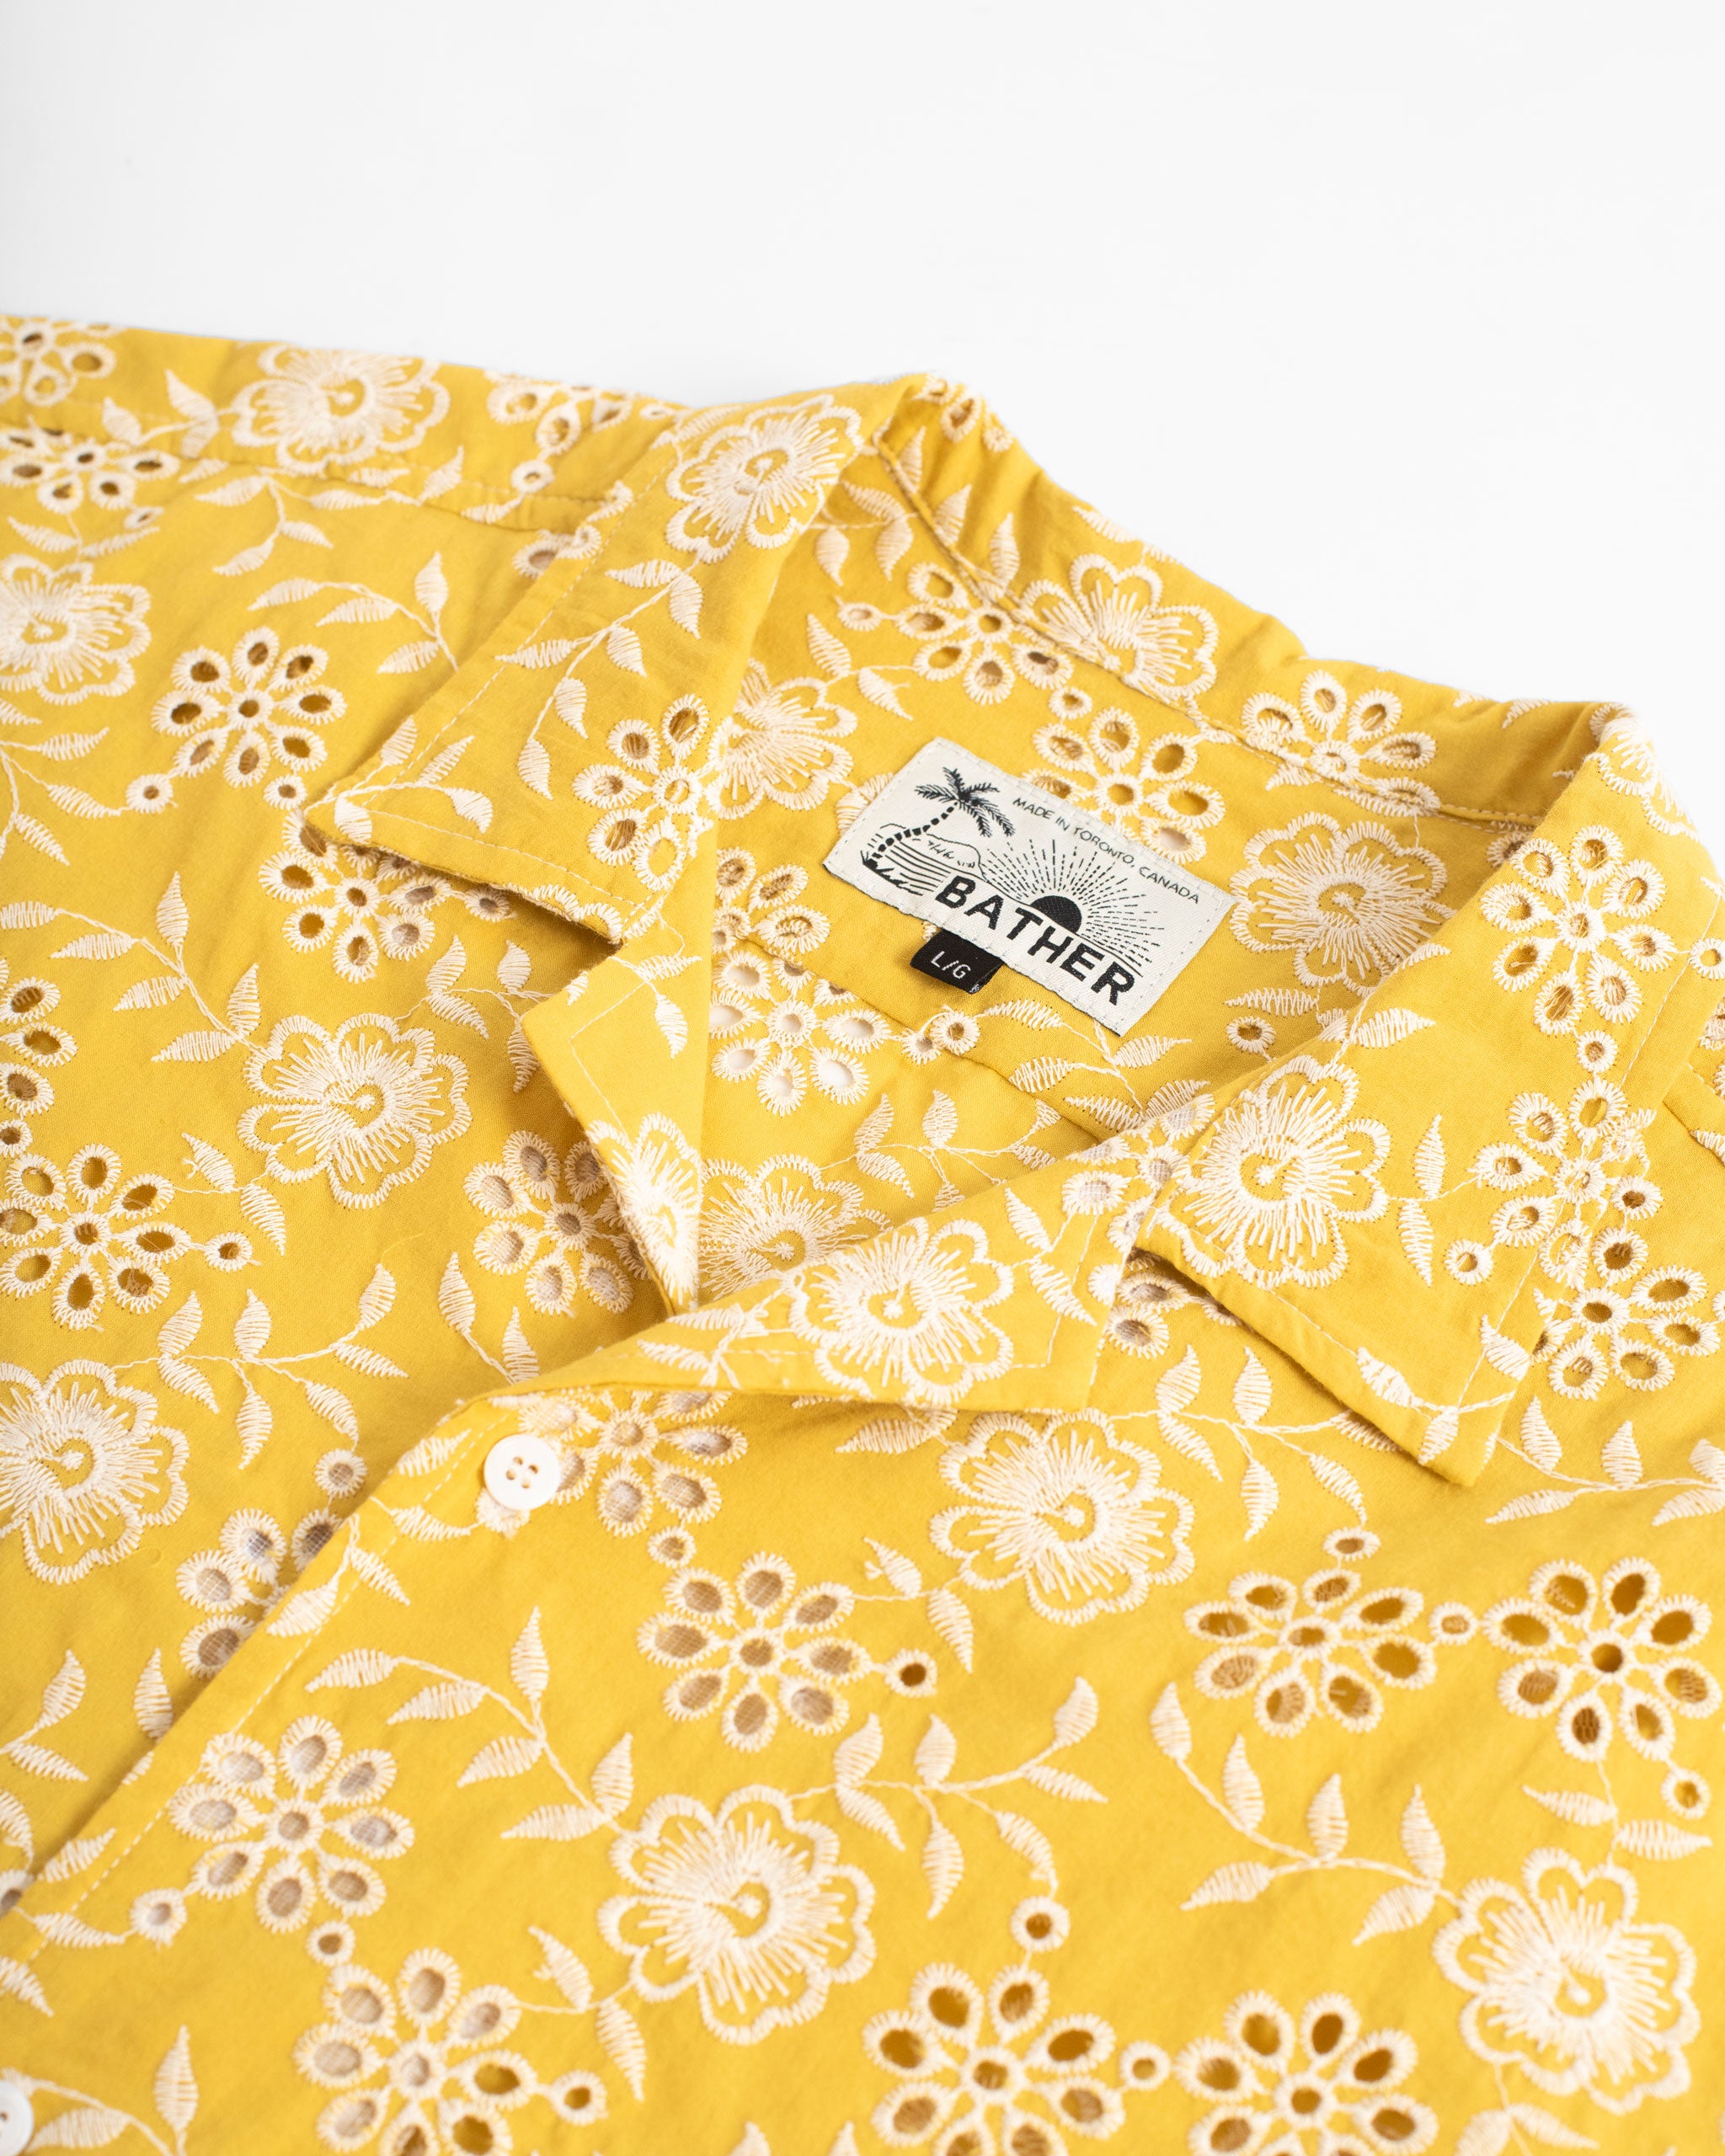 Collar close up of Yellow camp shirt with an embroidered floral pattern